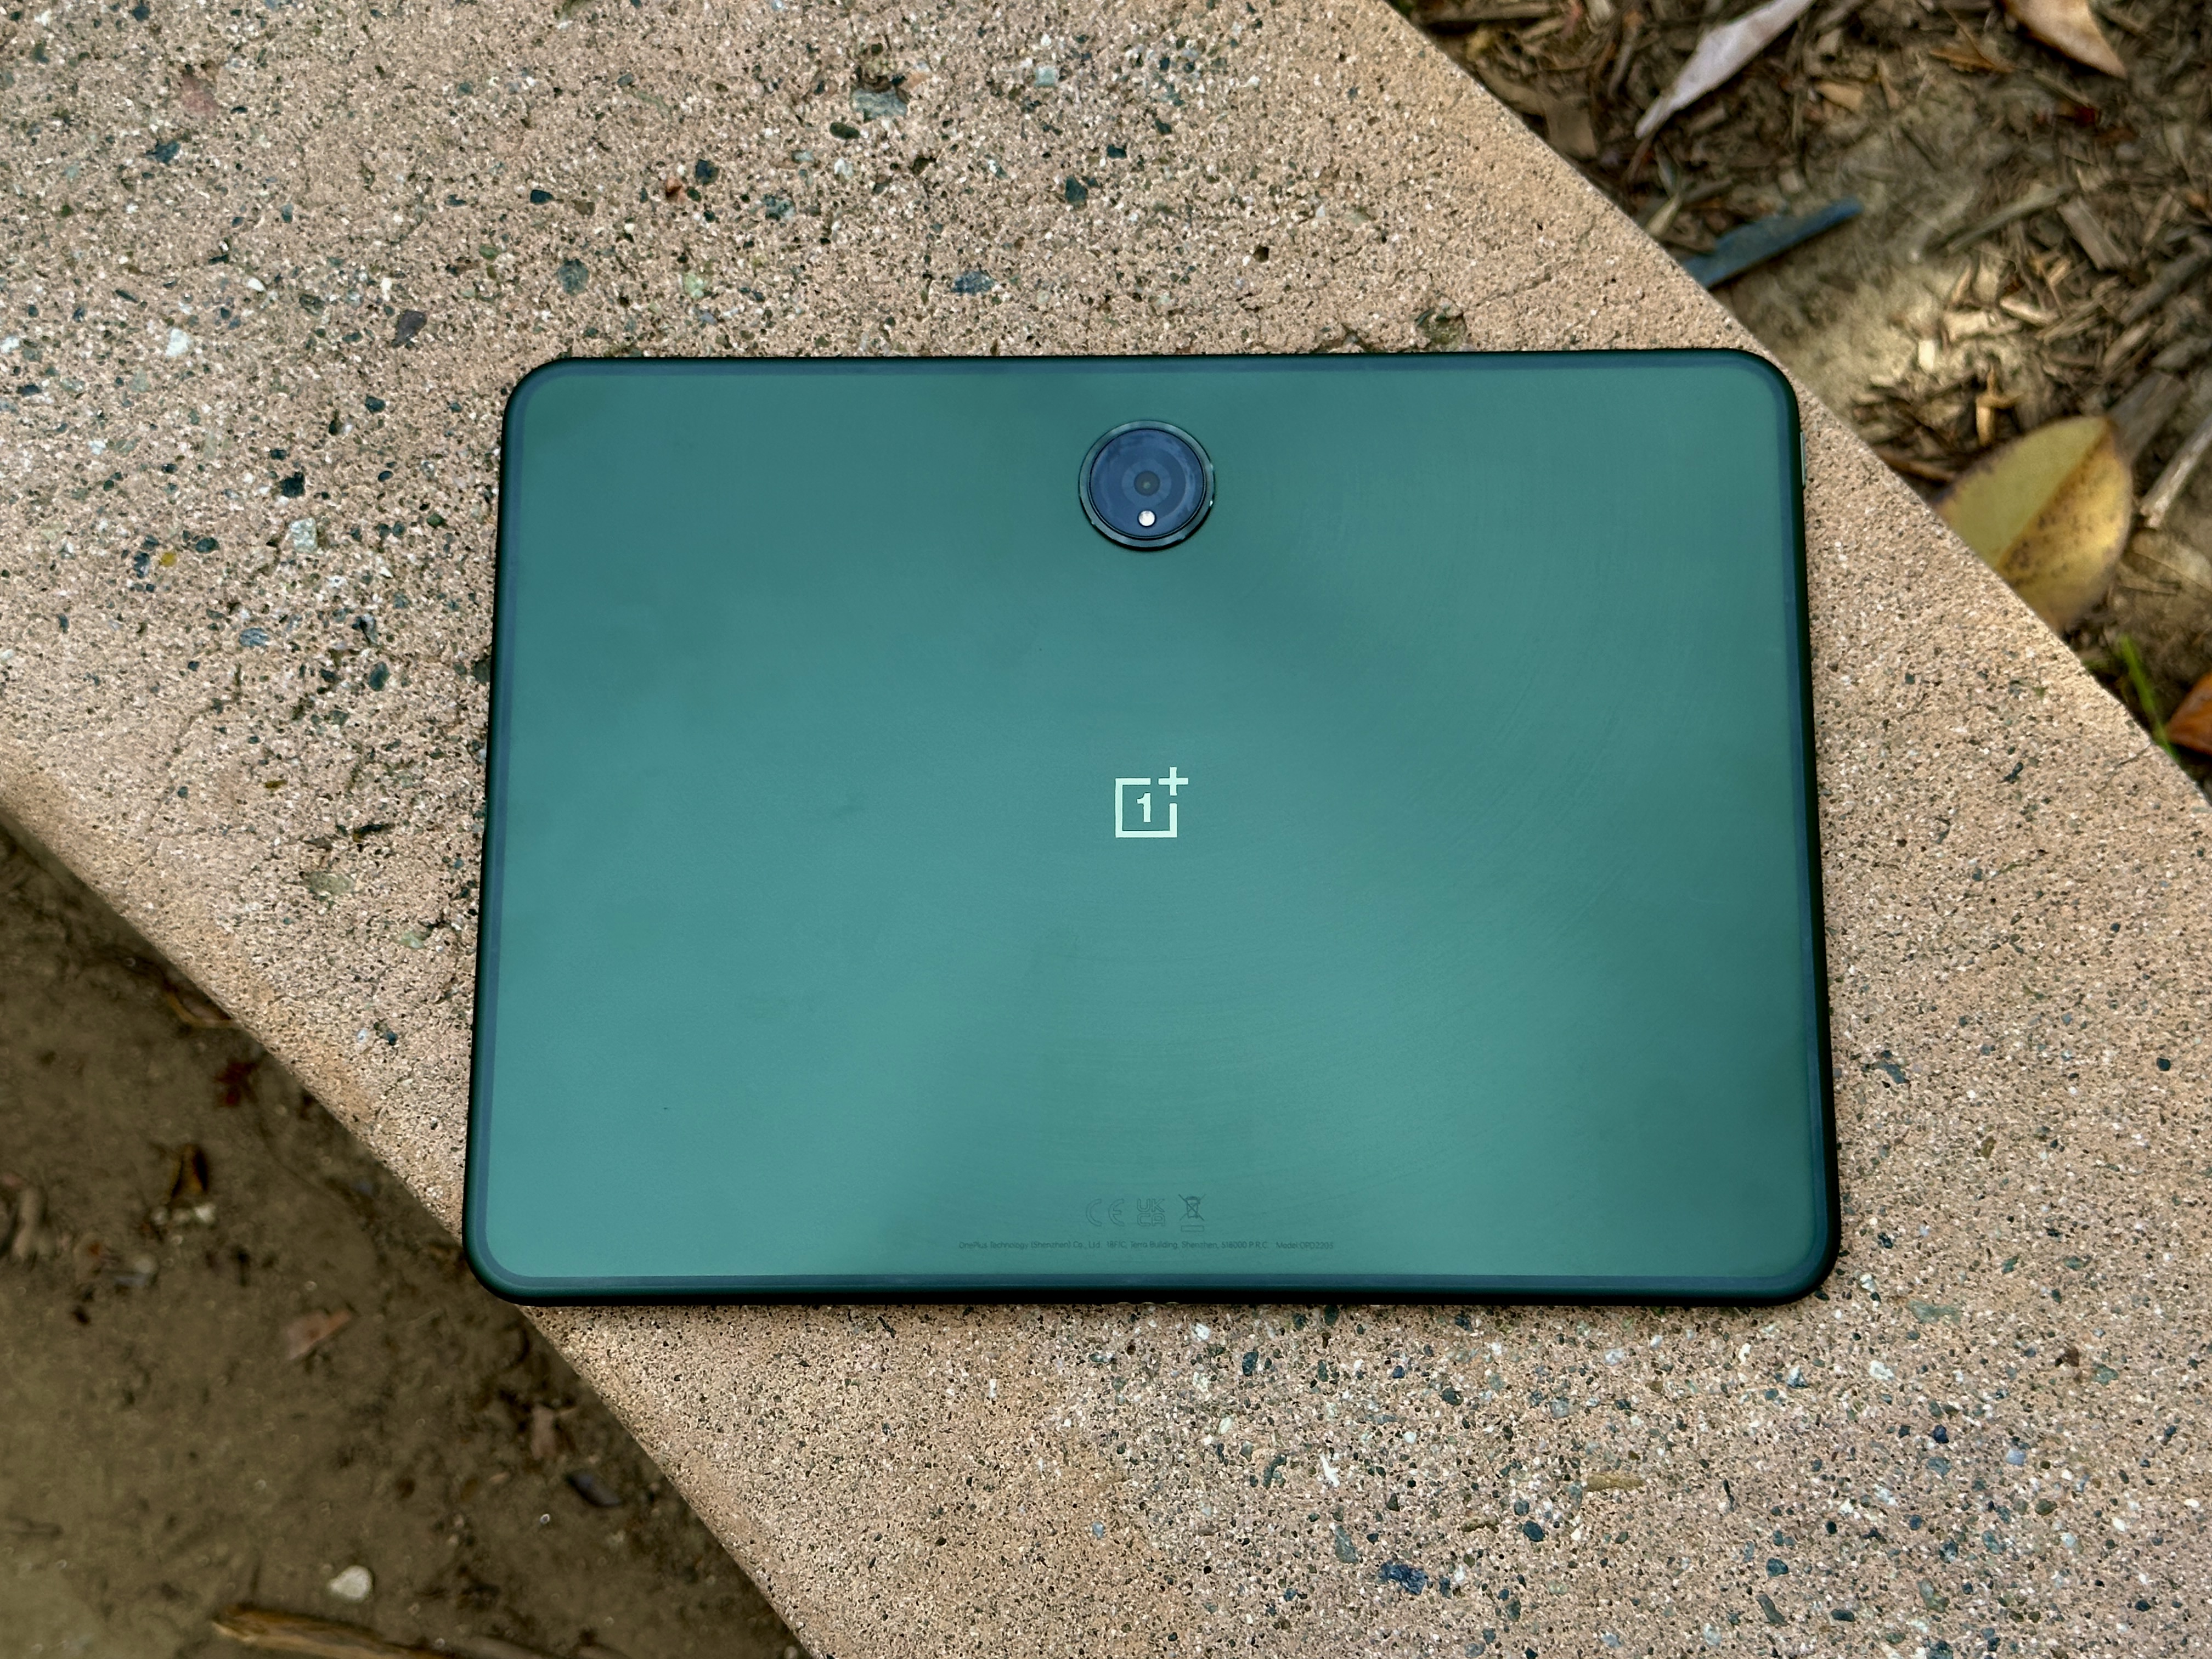 OnePlus Pad review: I really wanted to like this tablet, but it